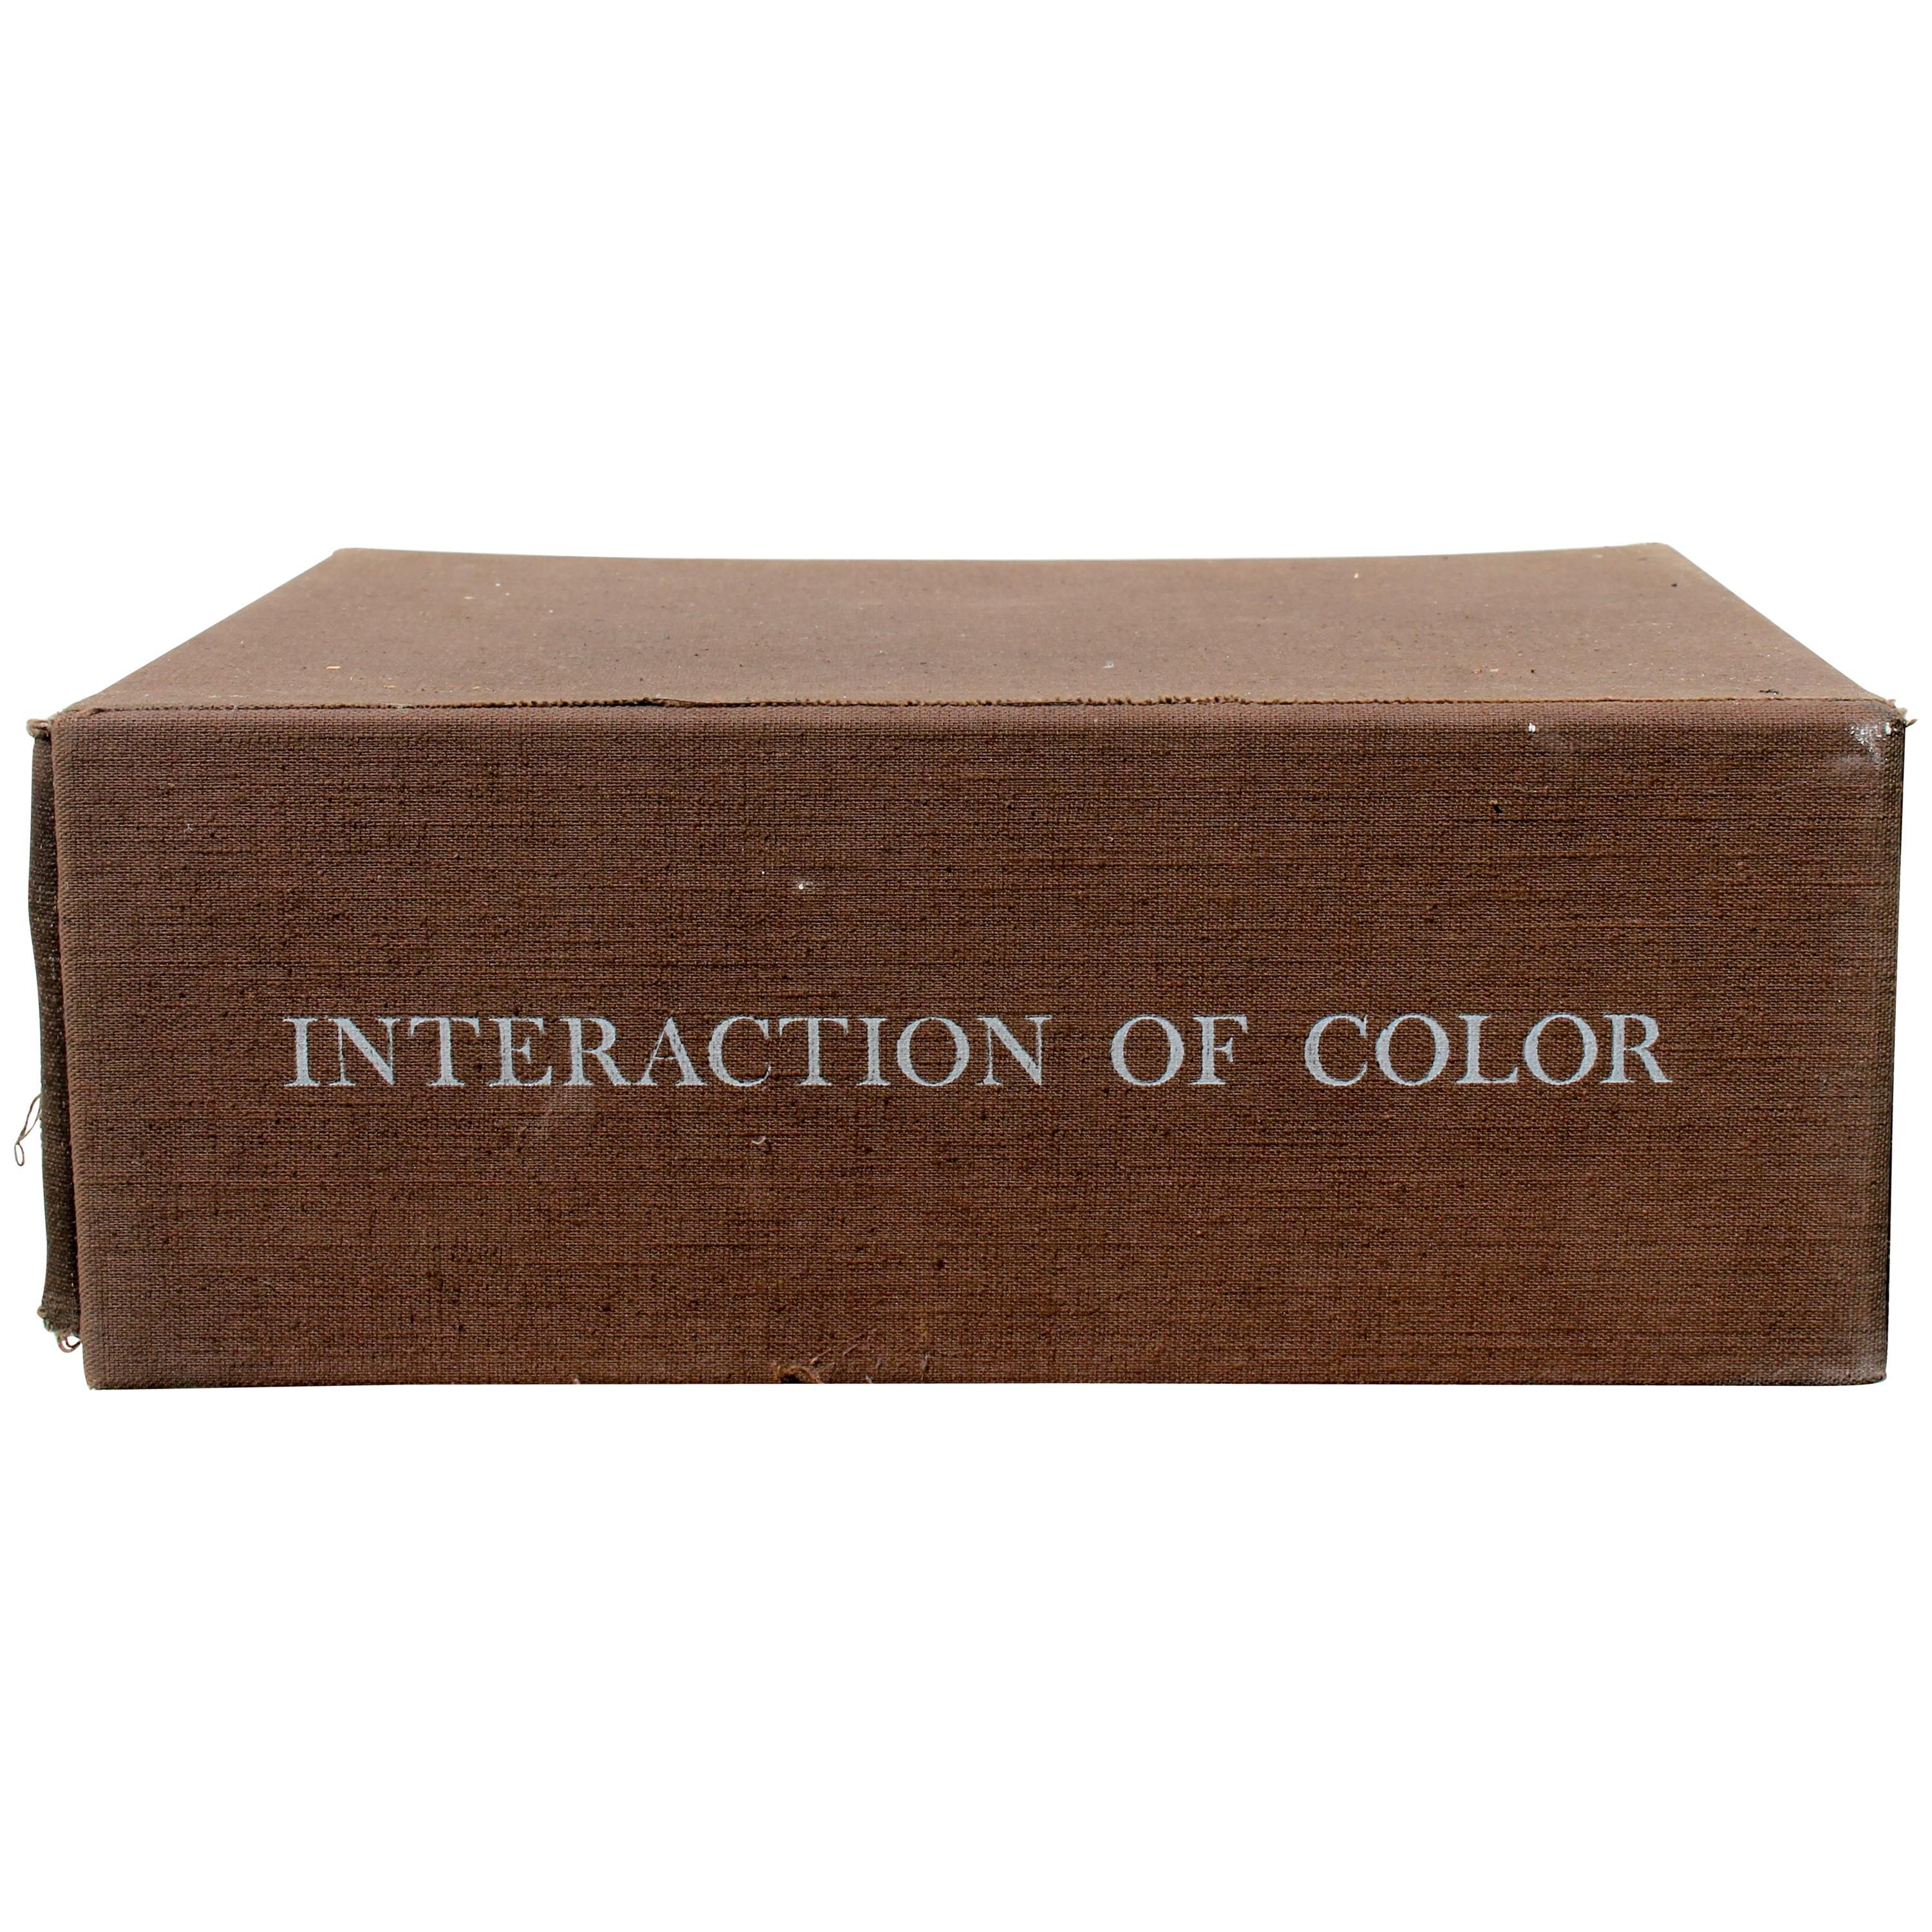 Josef Albers "Interaction of Color" Yale University Press, 1963